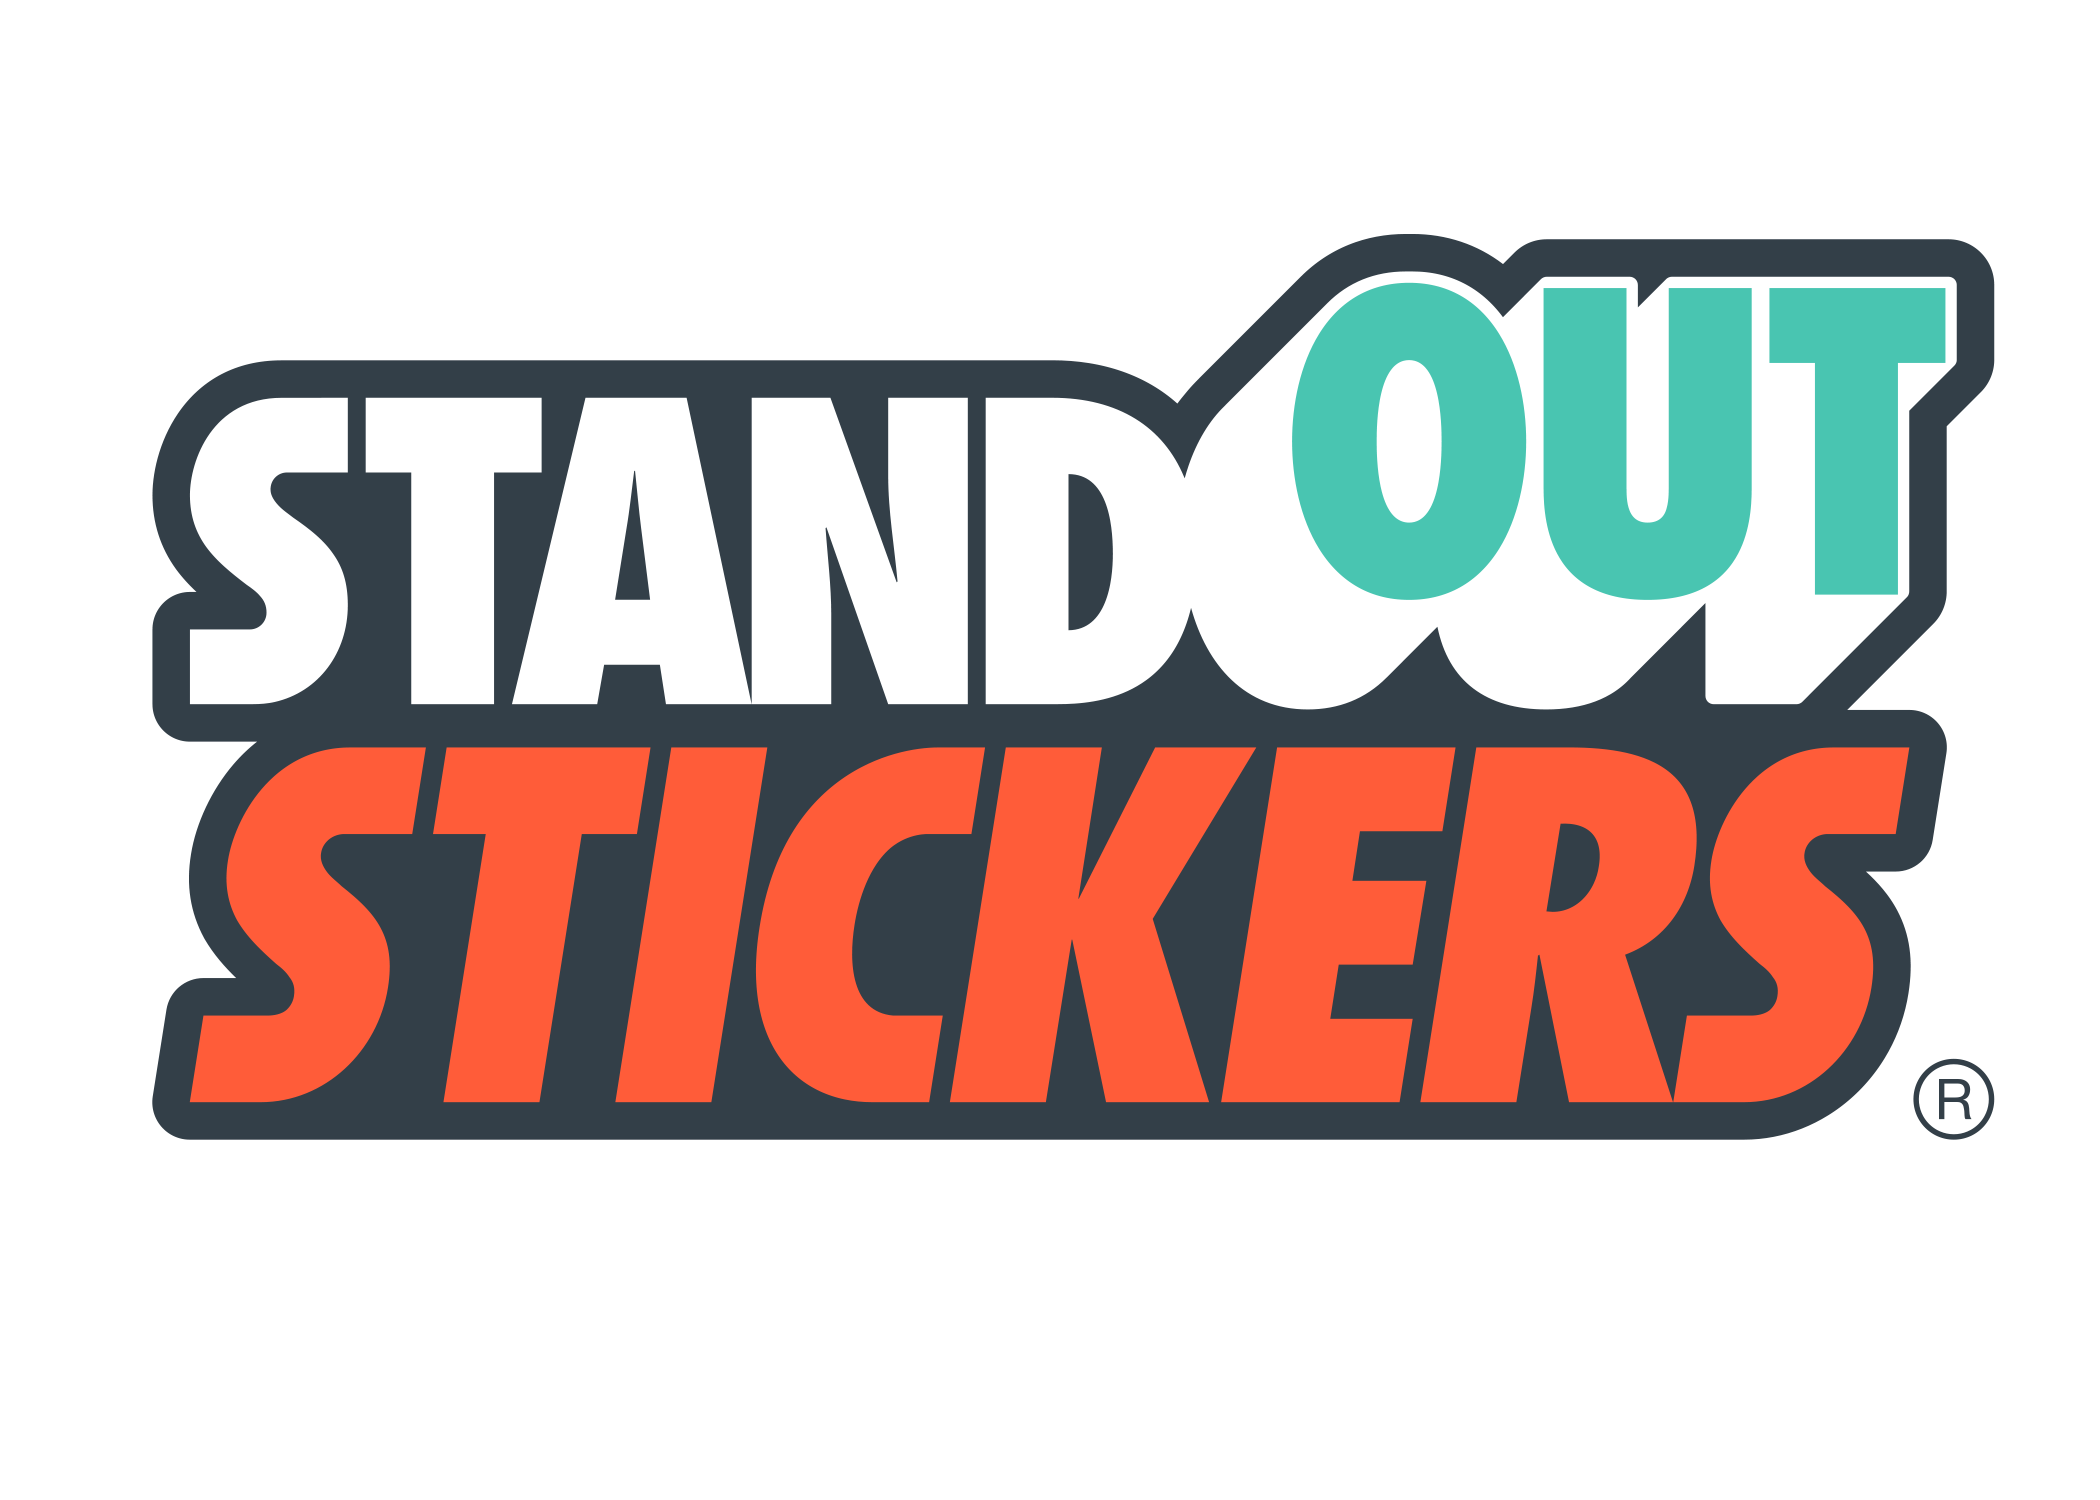 StandOut Stickers